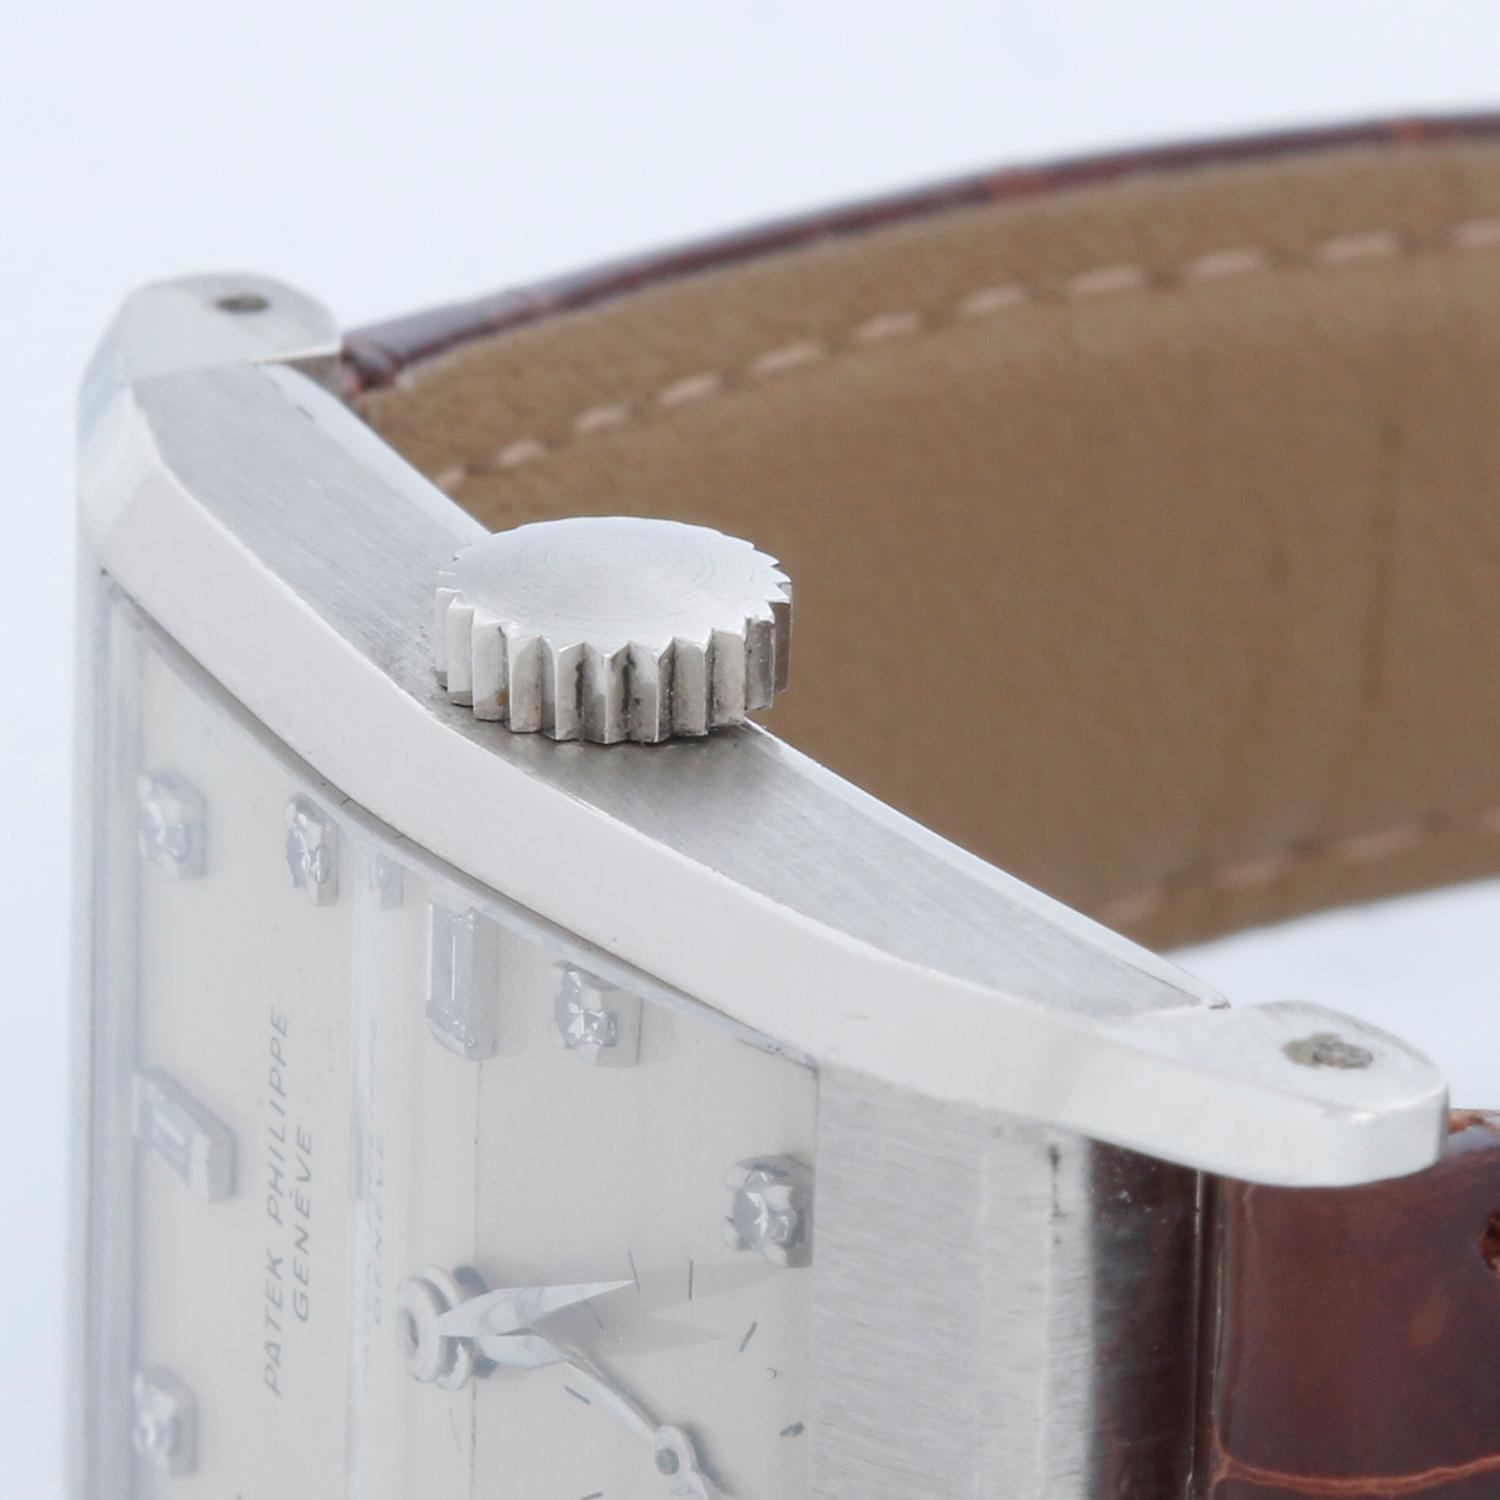 Vintage Patek Philippe & Co. Platinum Watch Ref 2461 - Manual Winding. Platinum rectangular case with original faceted crystal & sharp case facets   (22 x 42mm). Silvered Dial with diamond hour markers. Brown strap with tang buckle. Pre-owned with